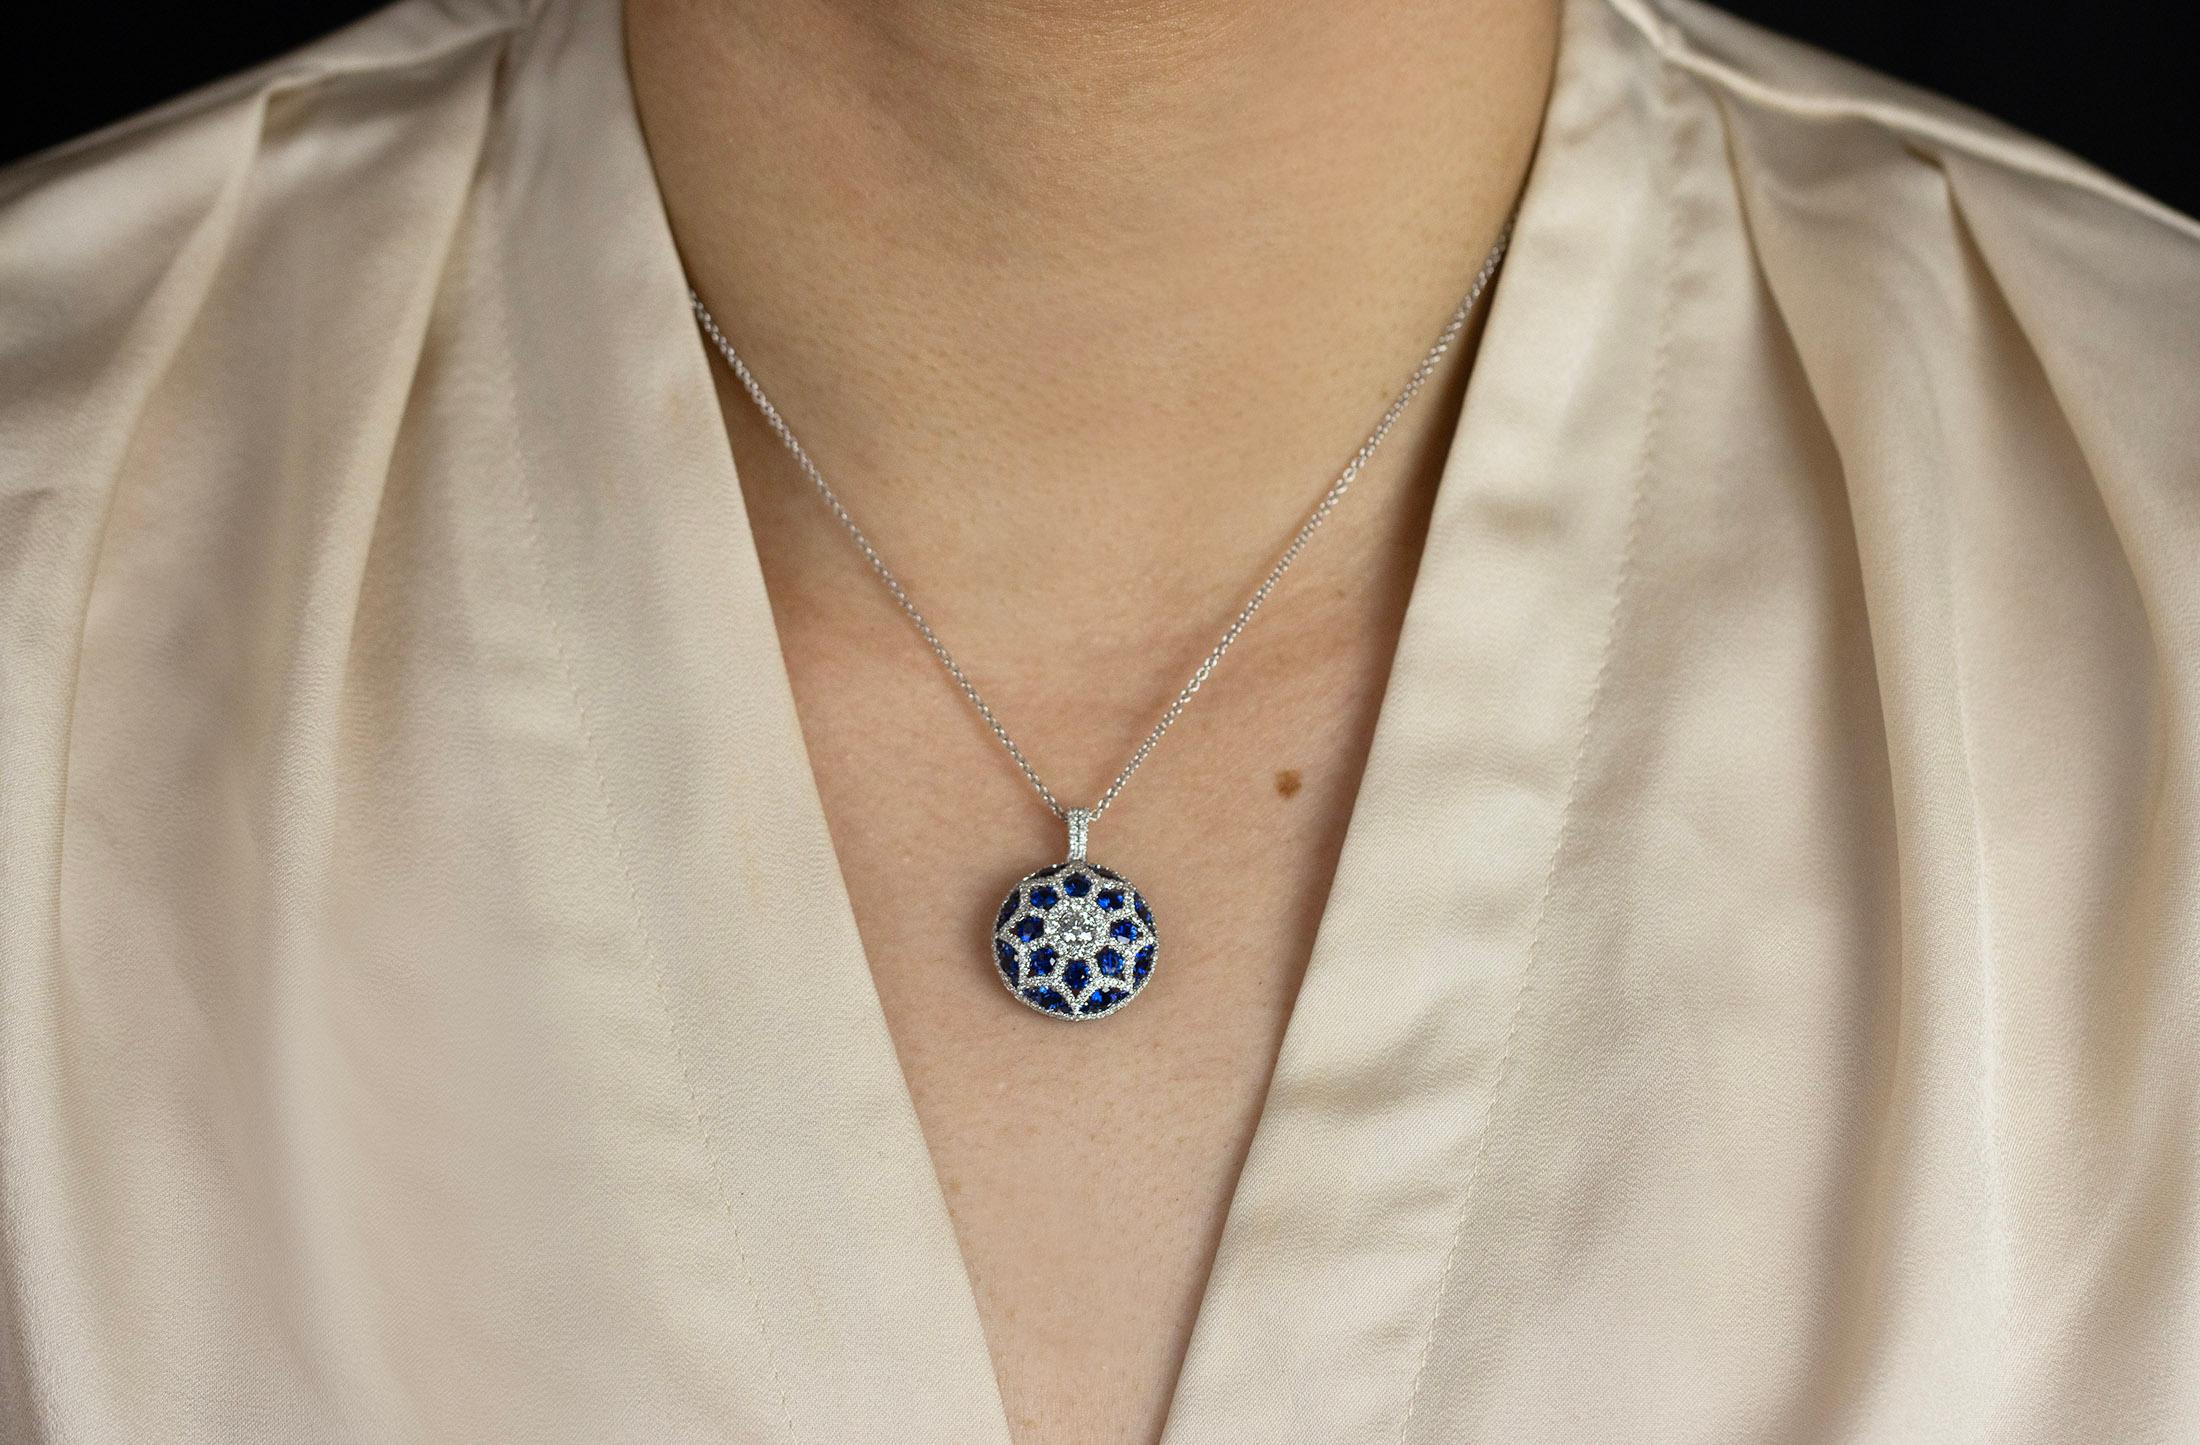 A fashionable circle pendant necklace with a convex design, showcasing a brilliant round diamond center stone, Surrounded by blue sapphires and diamonds in a unique and chic design. Diamonds weigh 0.97 carats total, sapphires weigh 2.58 carats